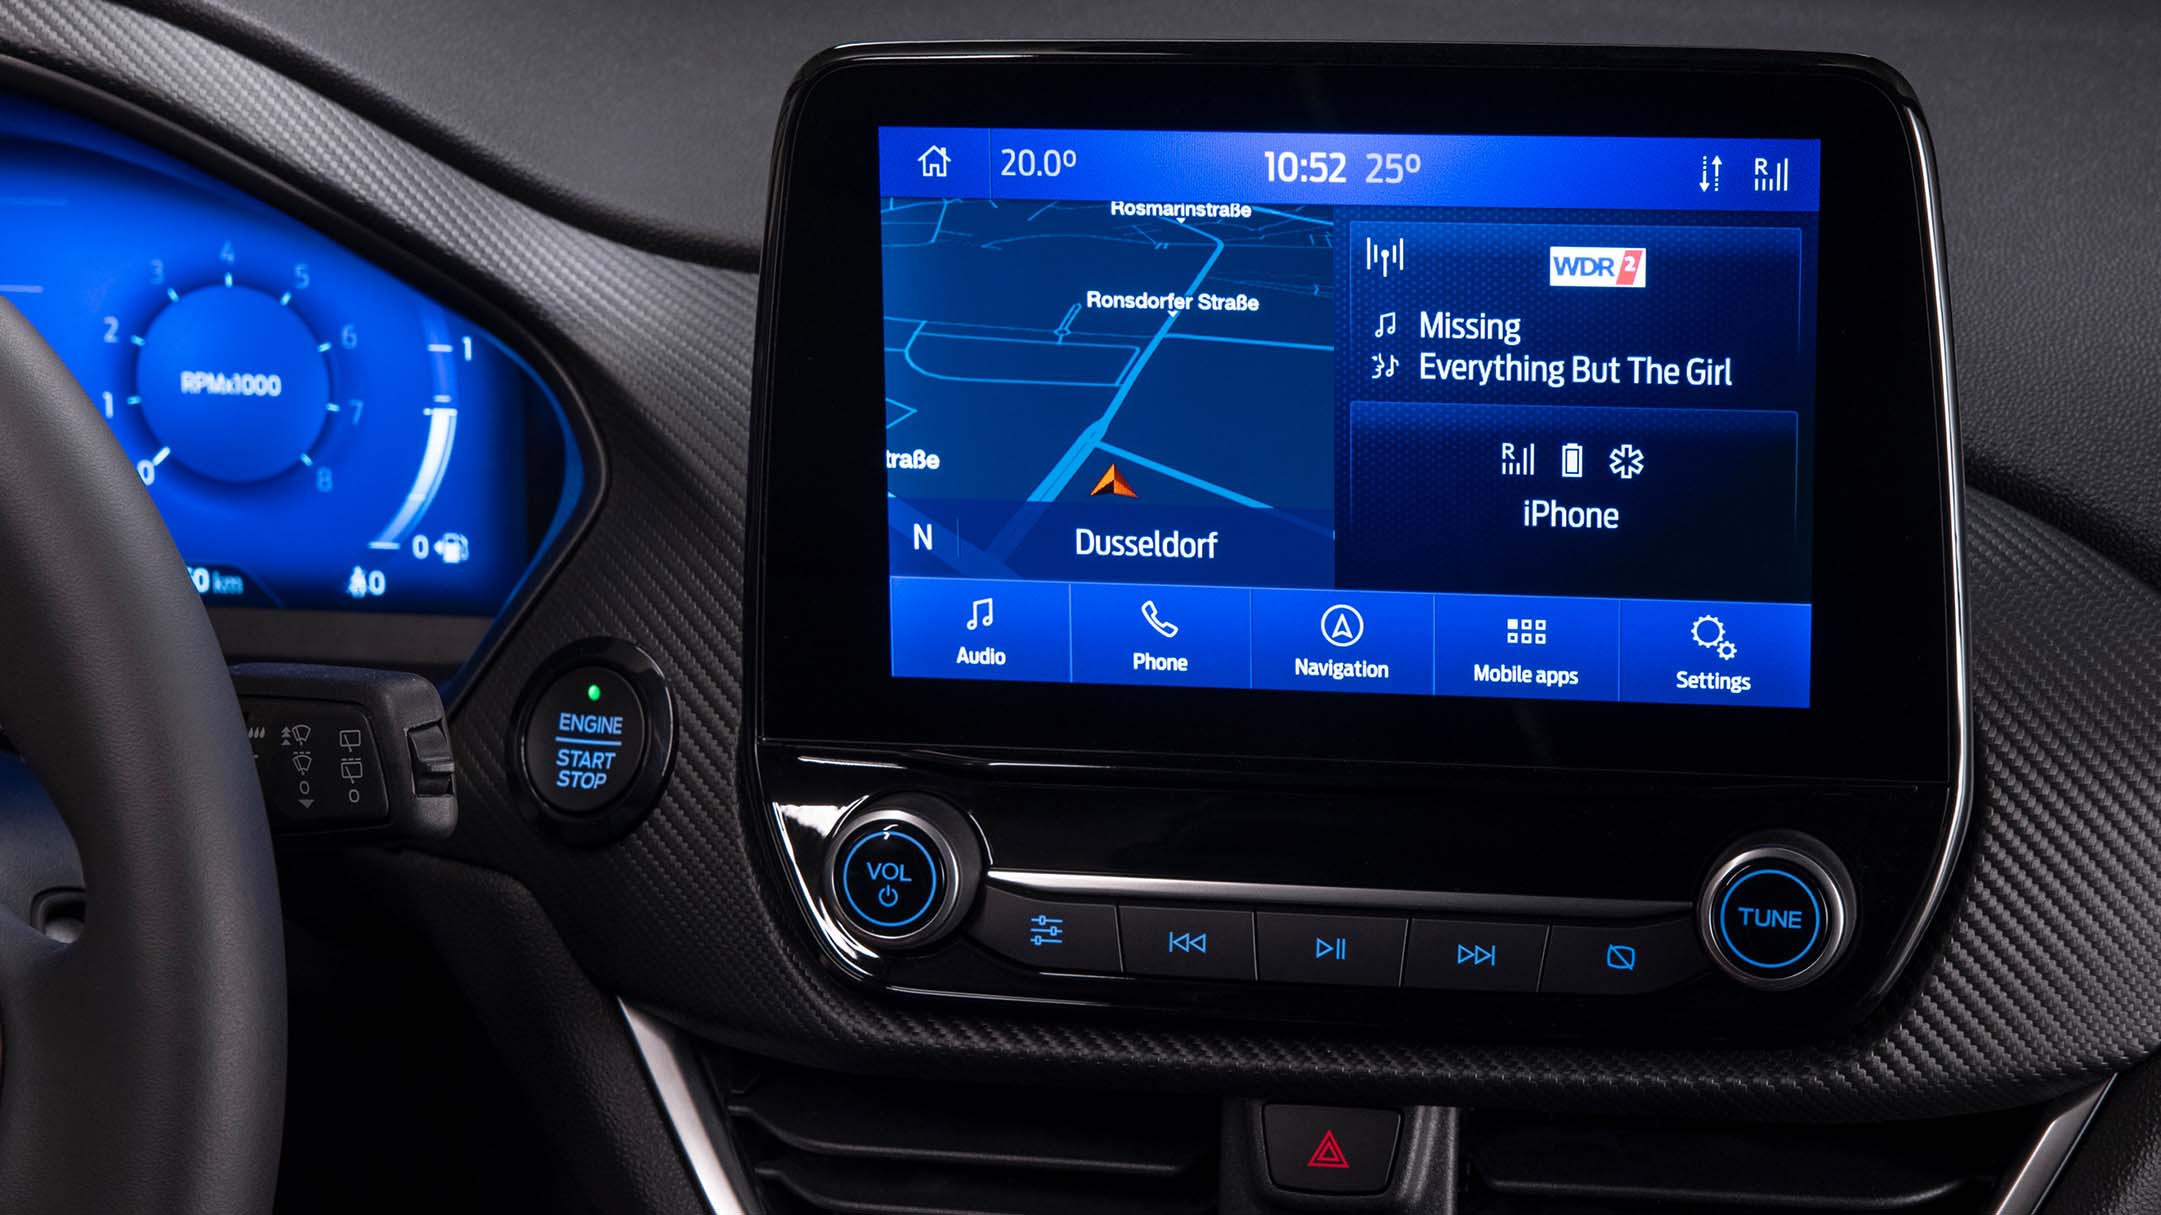 Ford Sync 3 Update Ford SYNC 3 With Applink Help, Resources & Support | Ford UK